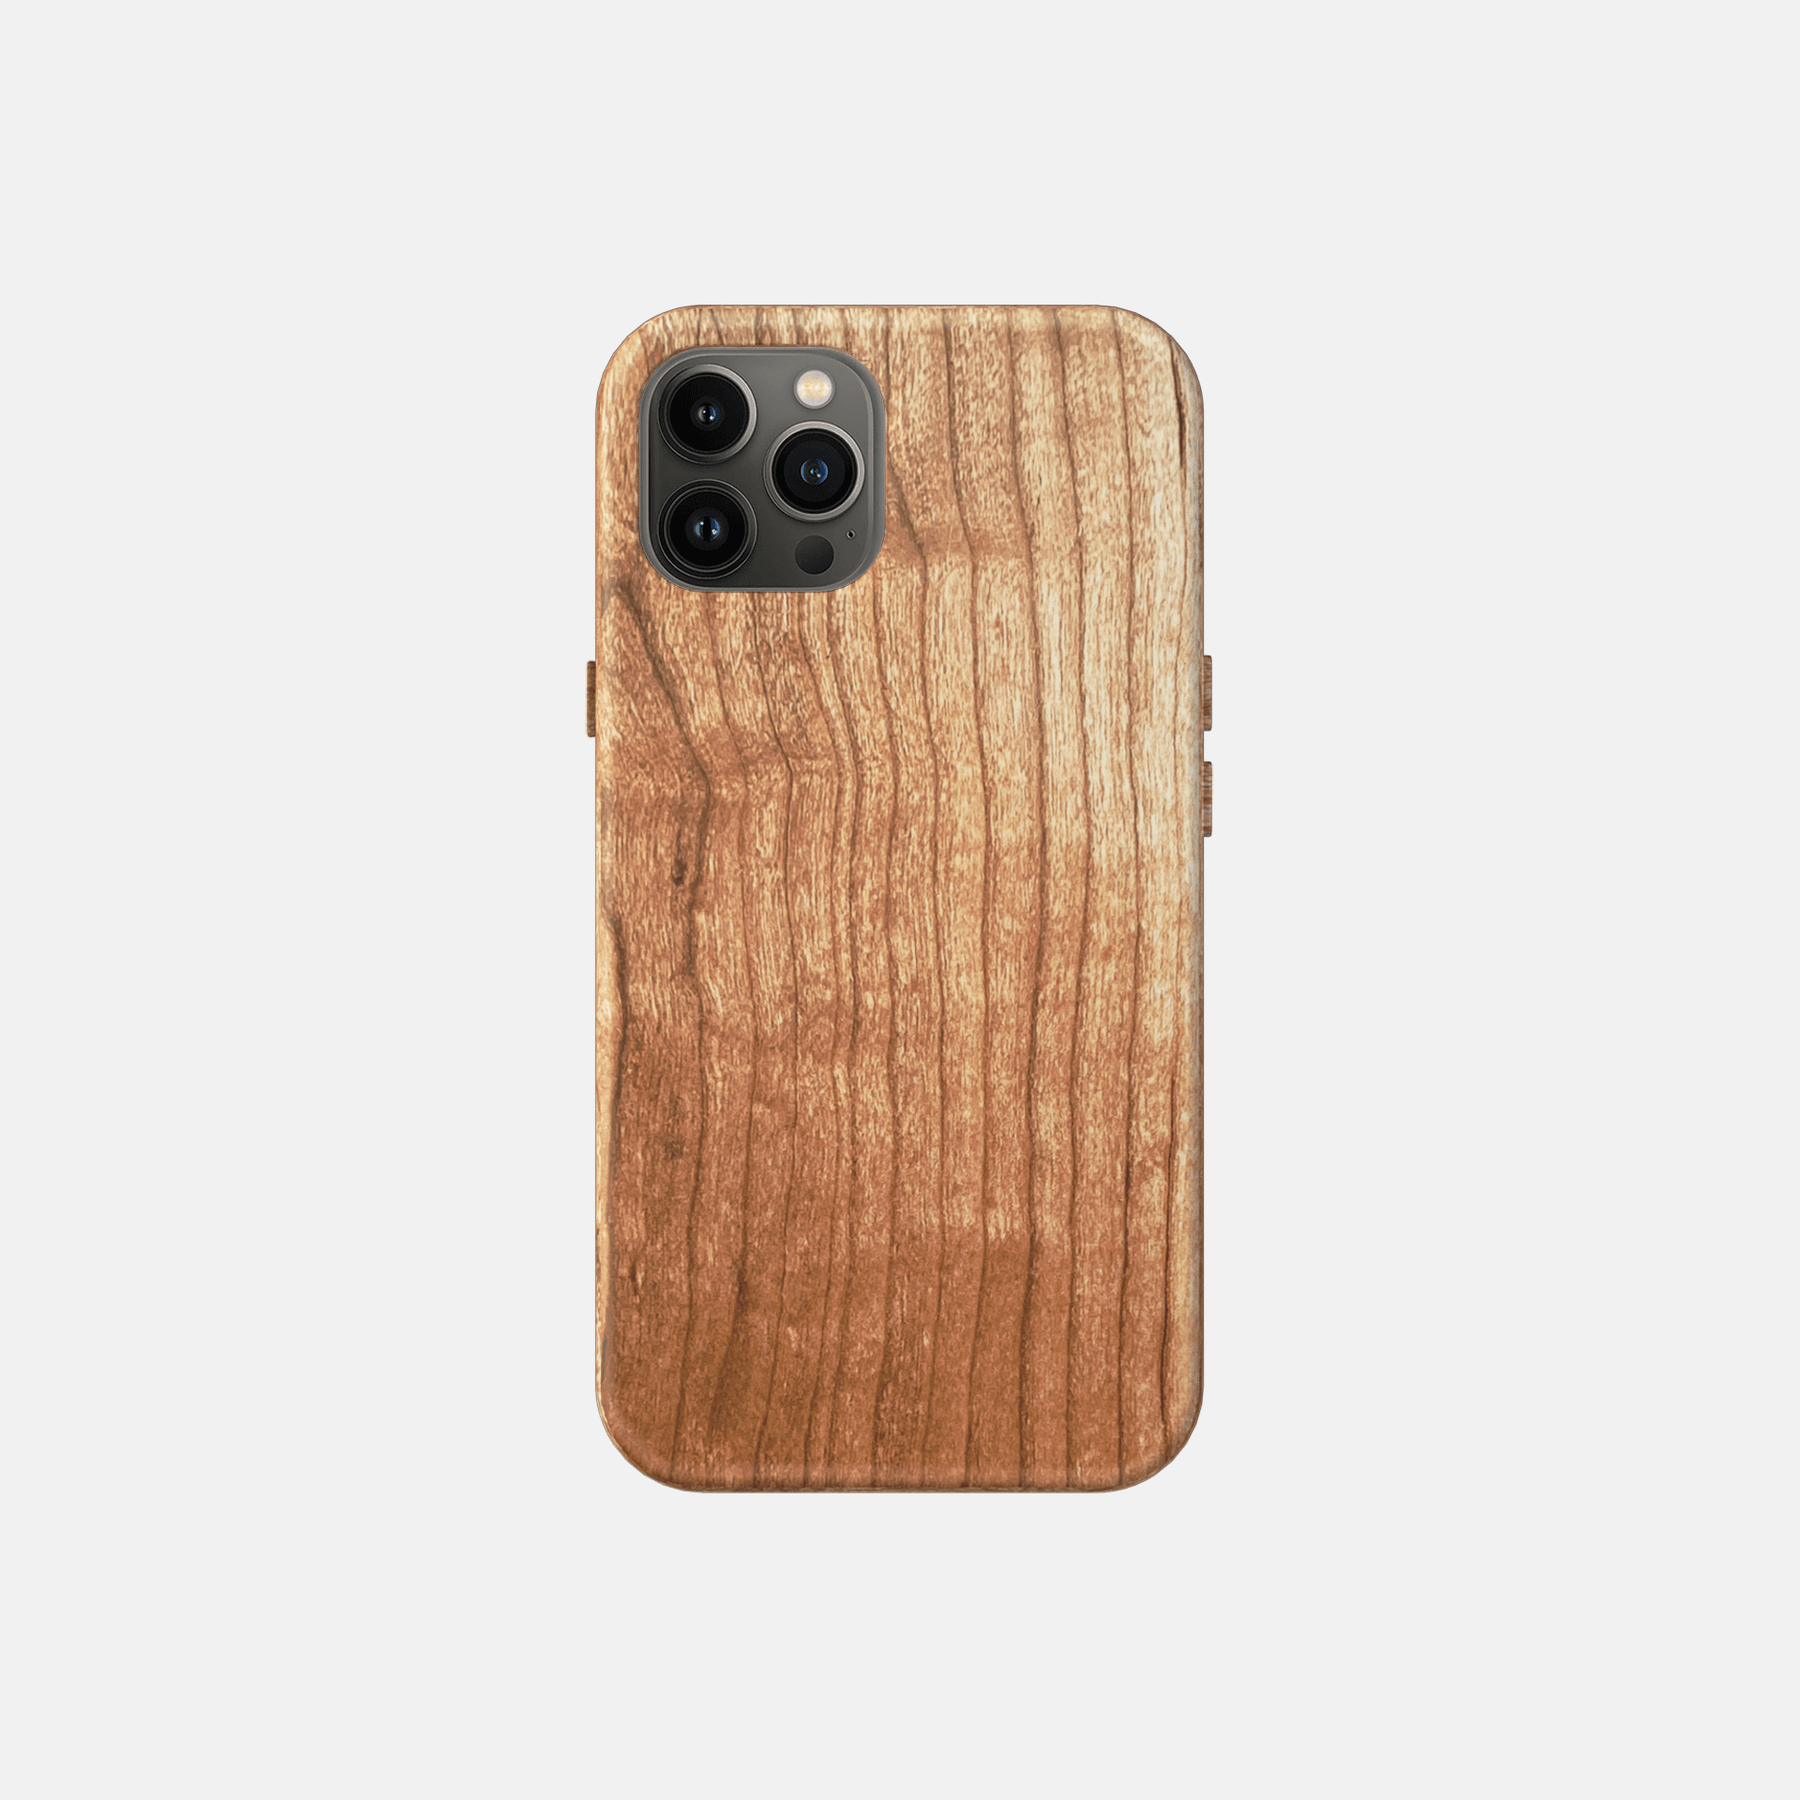 15 Pro Phone Case Handmade in by KerfCase